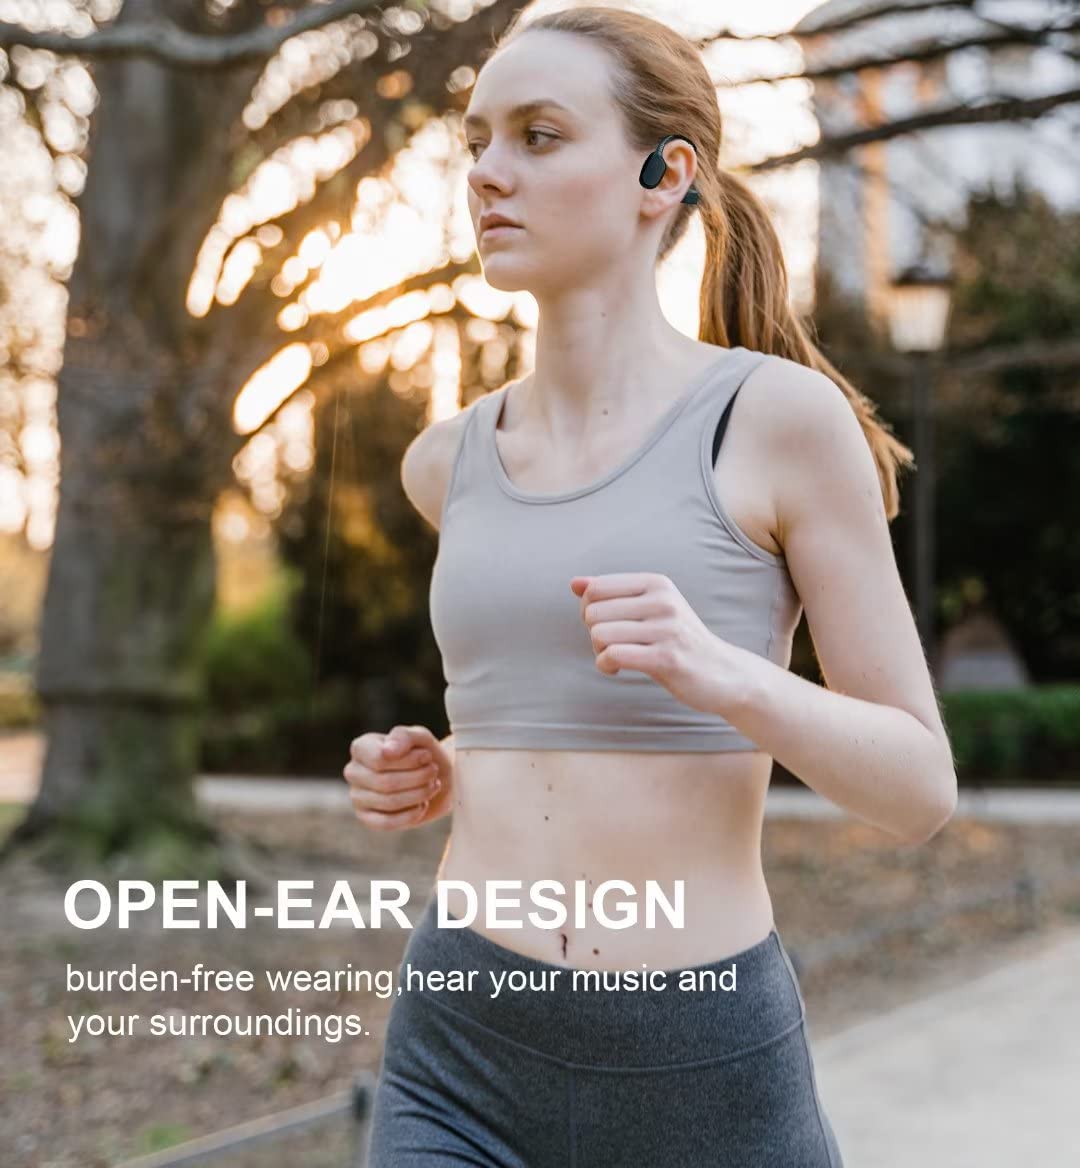 (🔥Last Day Promotion- SAVE 48% OFF)Waterproof Bone Conduction Headphones(BUY 2 GET FREE SHIPPING)